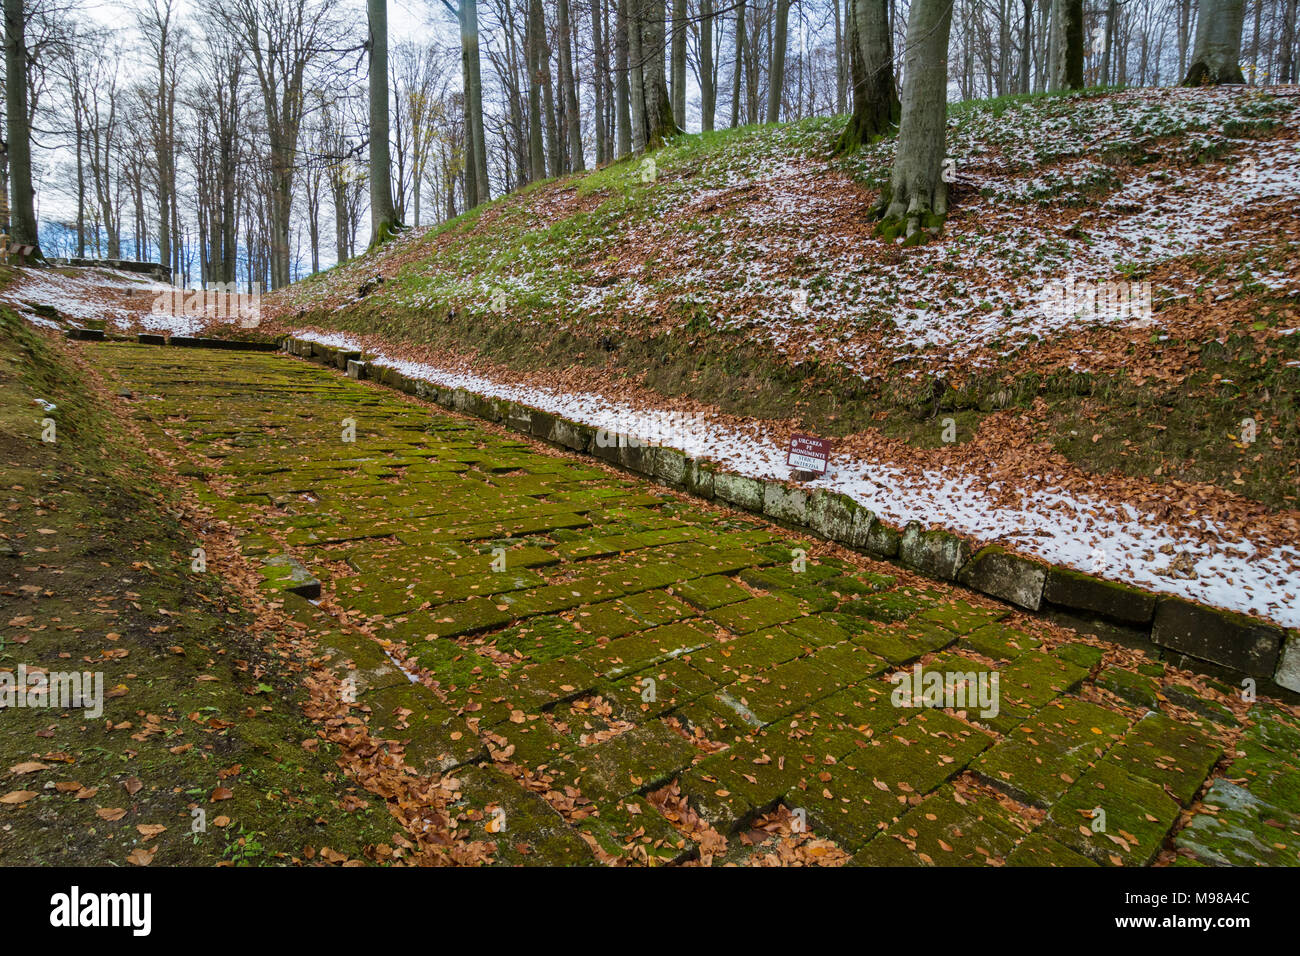 Paved ancient dacian road in Sarmizegetusa, capital of the Dacian Empire, UNESCO World Heritage Site Stock Photo